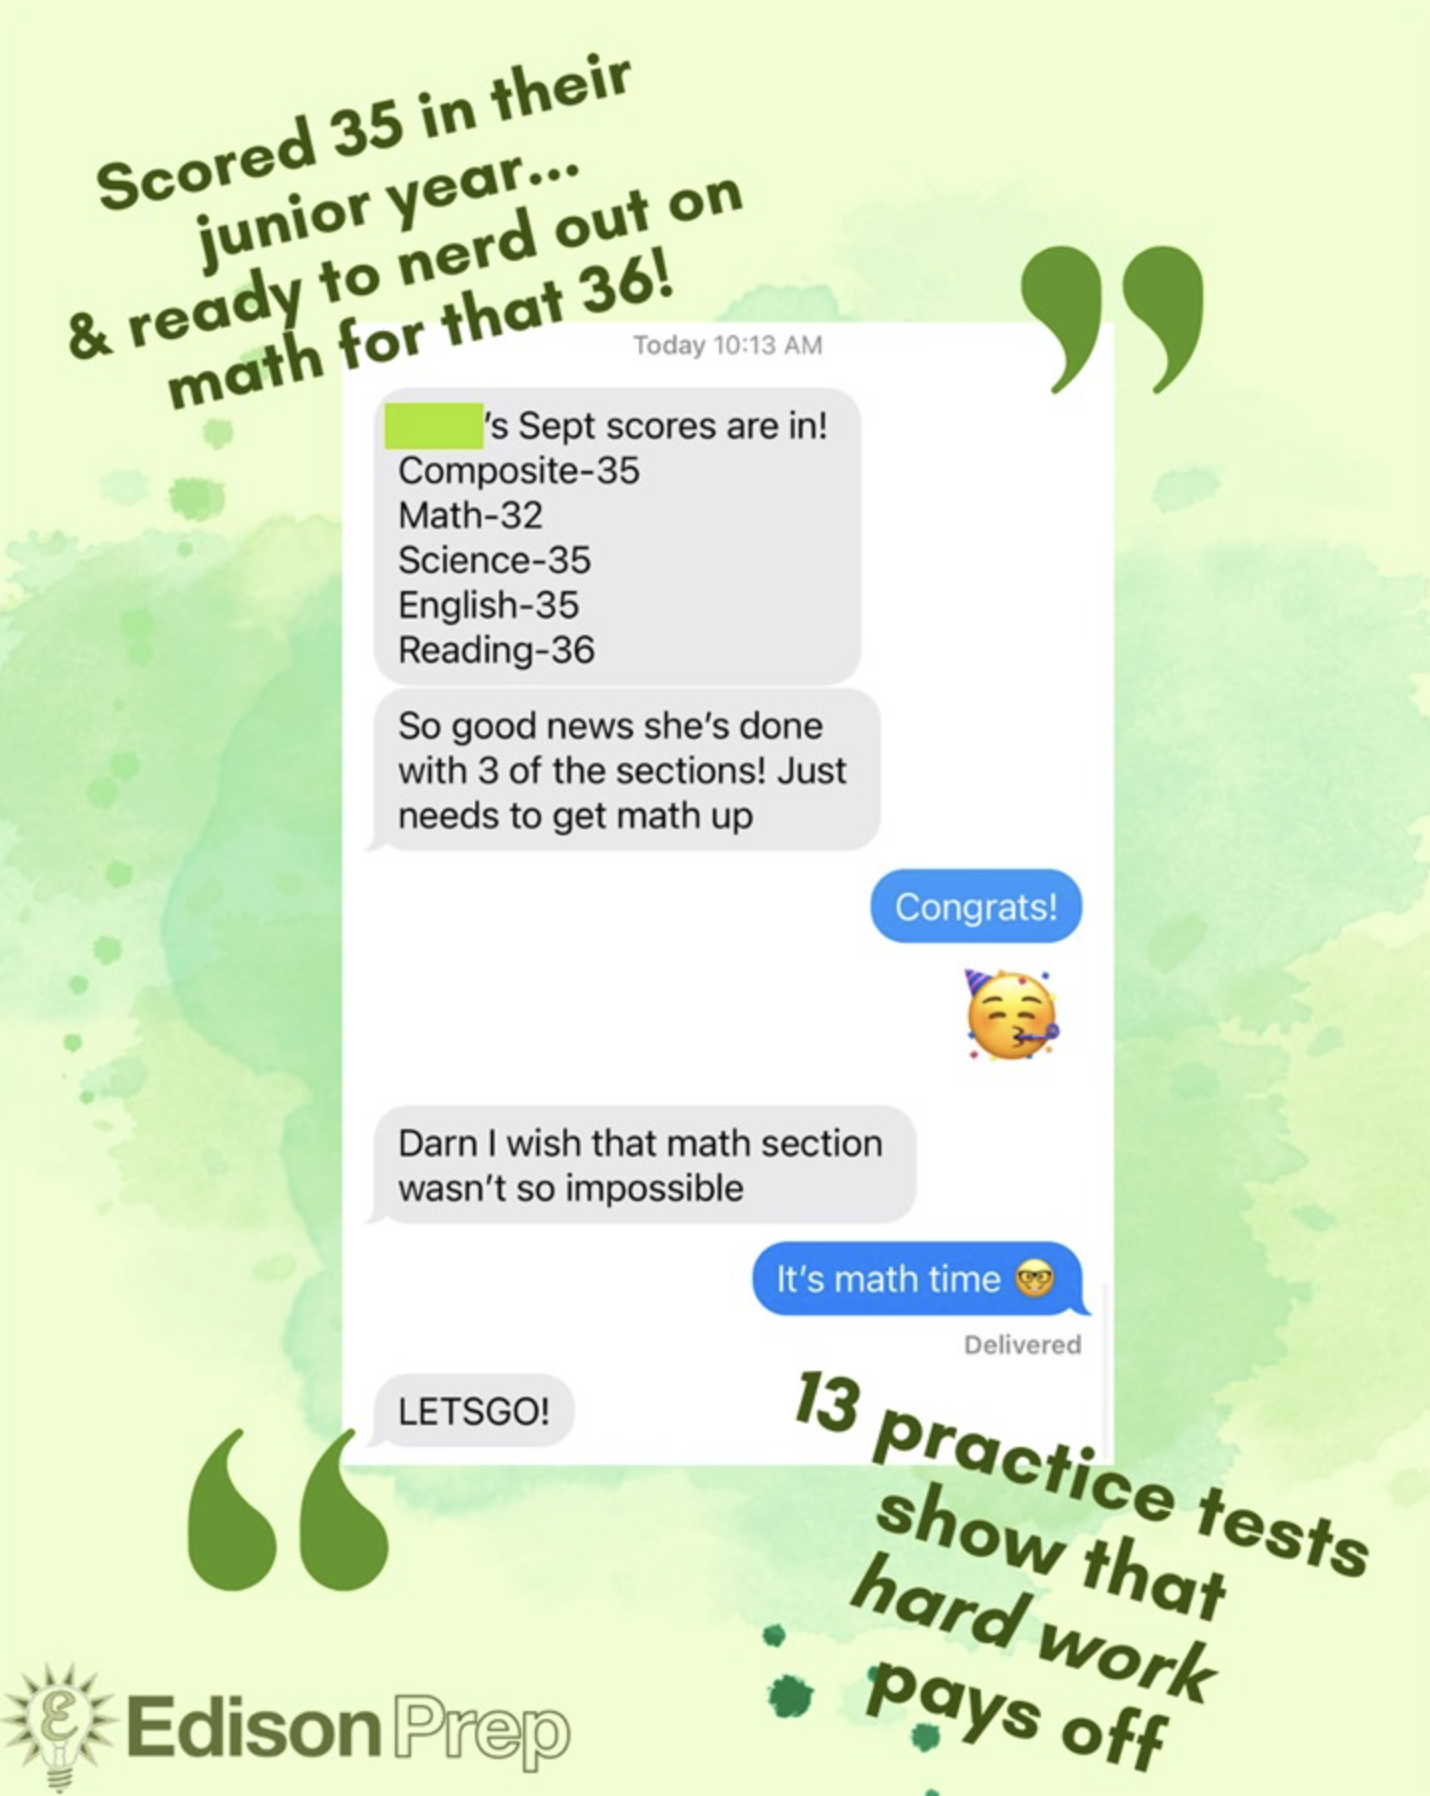 A celebratory graphic from Edison Prep with text message bubbles showing a student's impressive ACT scores: a composite of 35, with 32 in Math, 35 in Science, 35 in English, and 36 in Reading. The accompanying texts indicate the student is done with three sections and just needs to improve in Math. The response 'It's math time' and a motivational 'LETSGO!' indicate a positive and proactive attitude towards this challenge. The background features a green watercolor effect, and there's a footnote stating '13 practice tests show that hard work pays off', emphasizing the value of practice and determination.